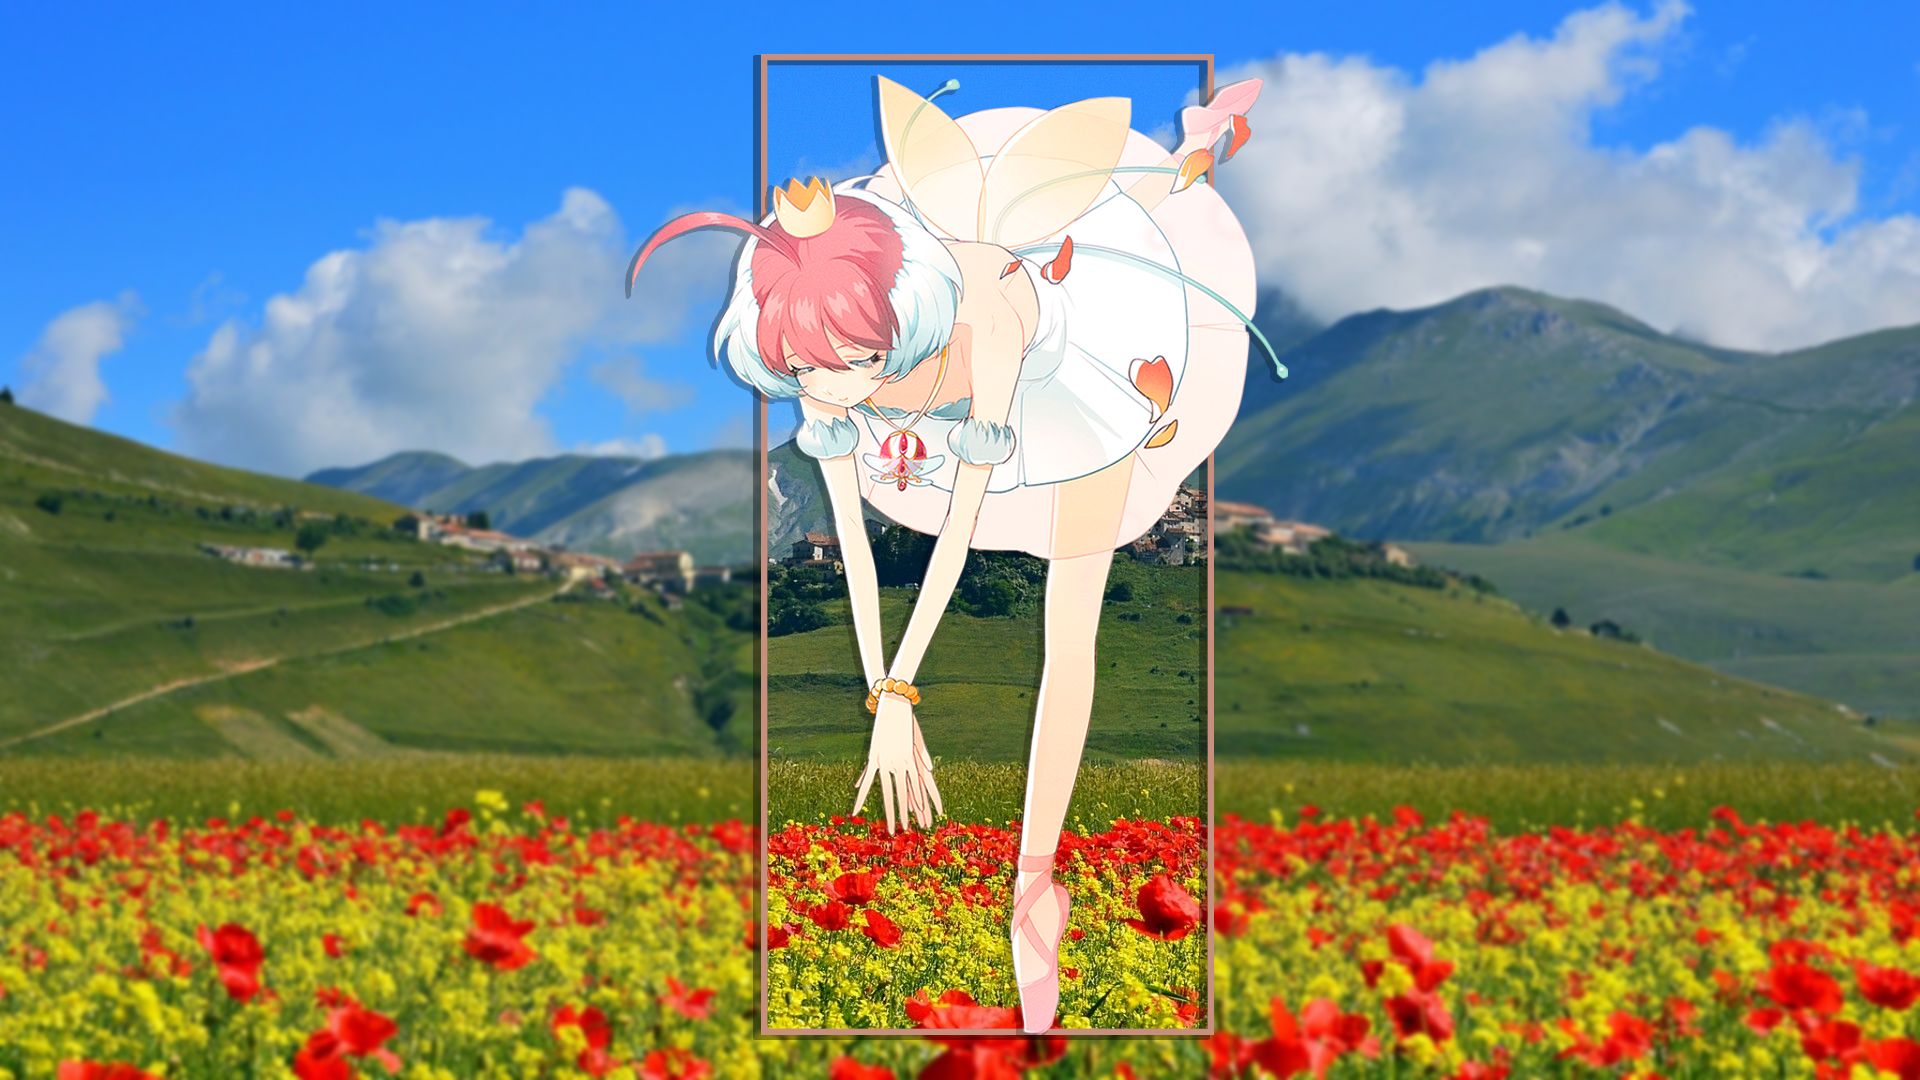 Anime 1920x1080 anime girls picture-in-picture Italy poppies